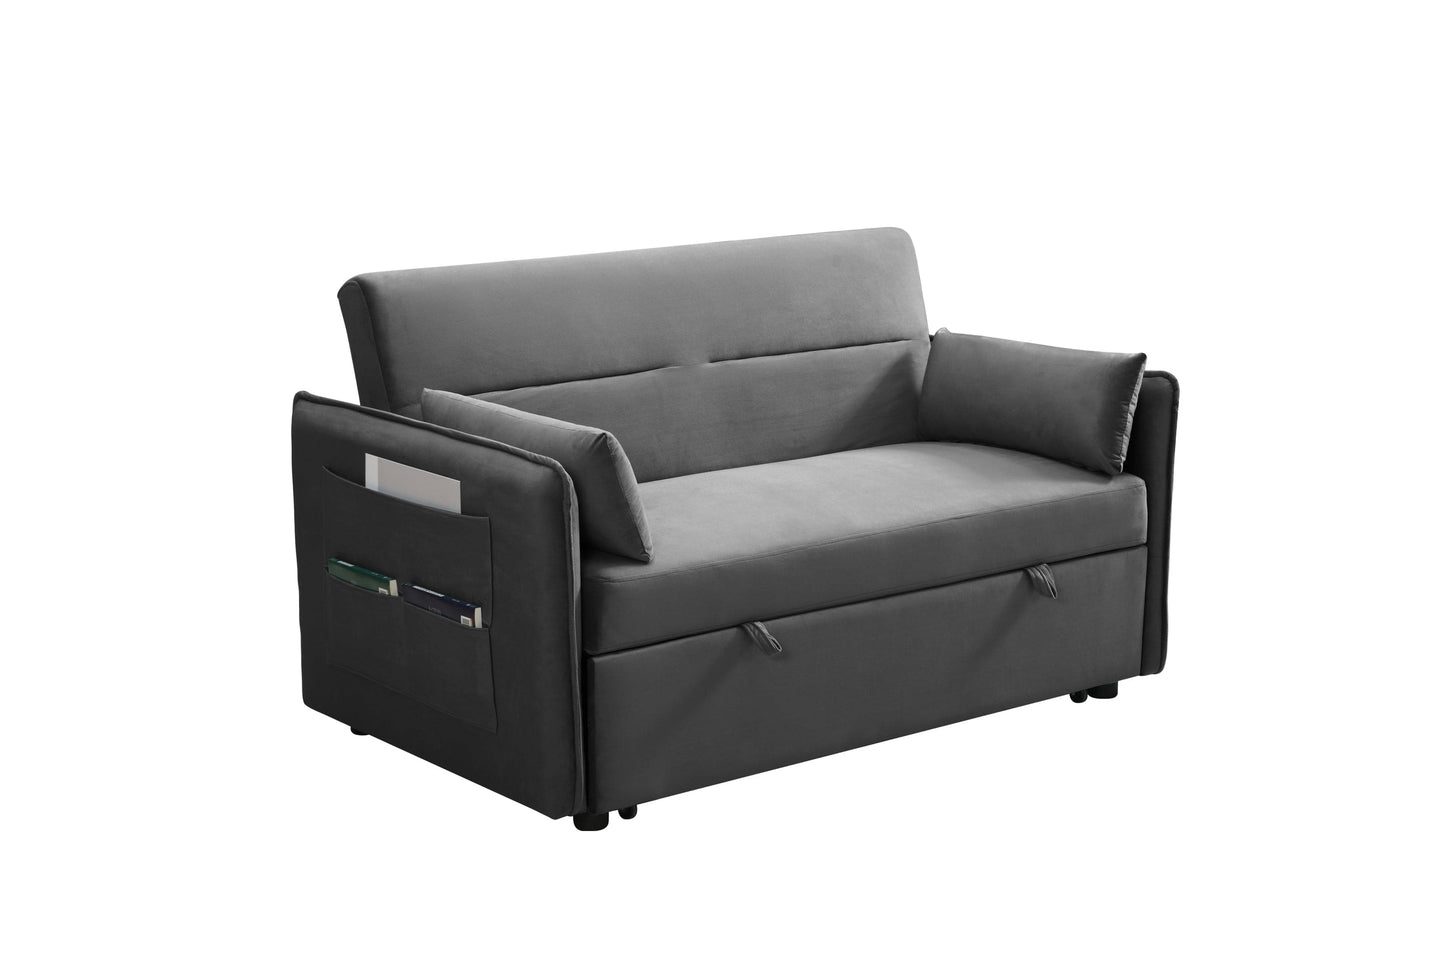 MEGA Pull Out Sofa Bed, Modern Adjustable Pull Out Bed Lounge Chair with 2 Side Pockets, 2 Pillows for Home Office